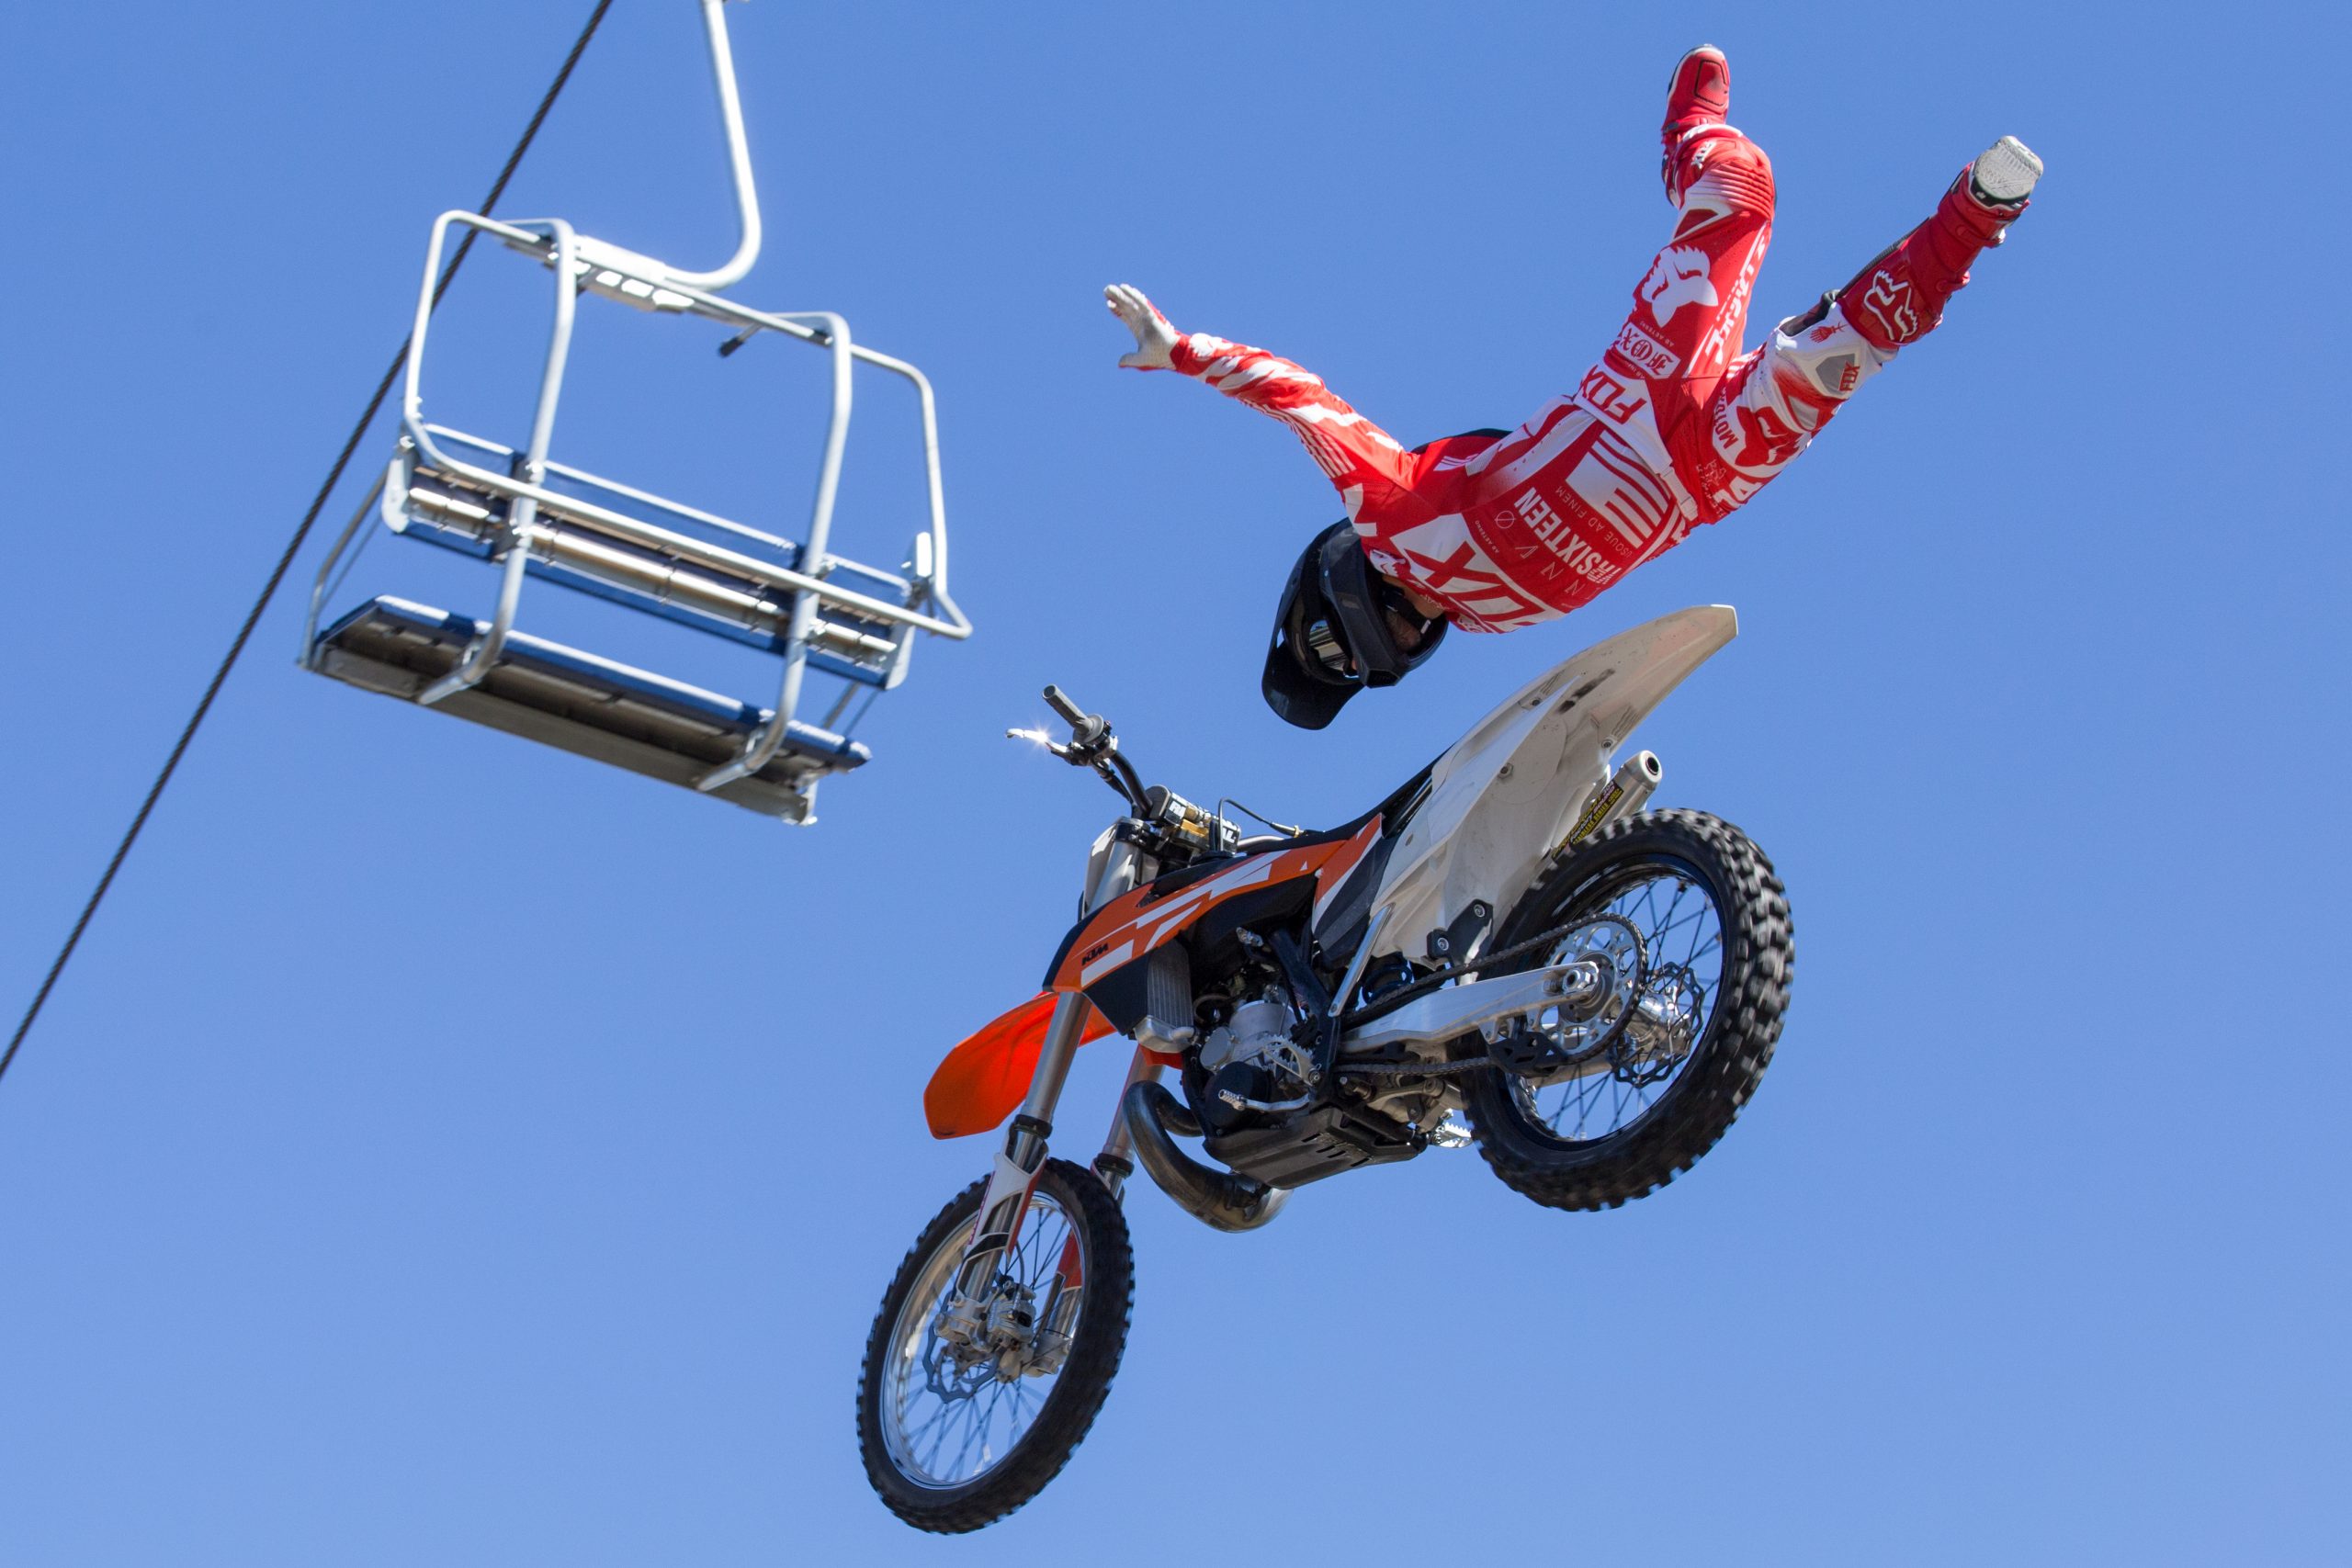 Motocross at CA State Fair - approved for media use